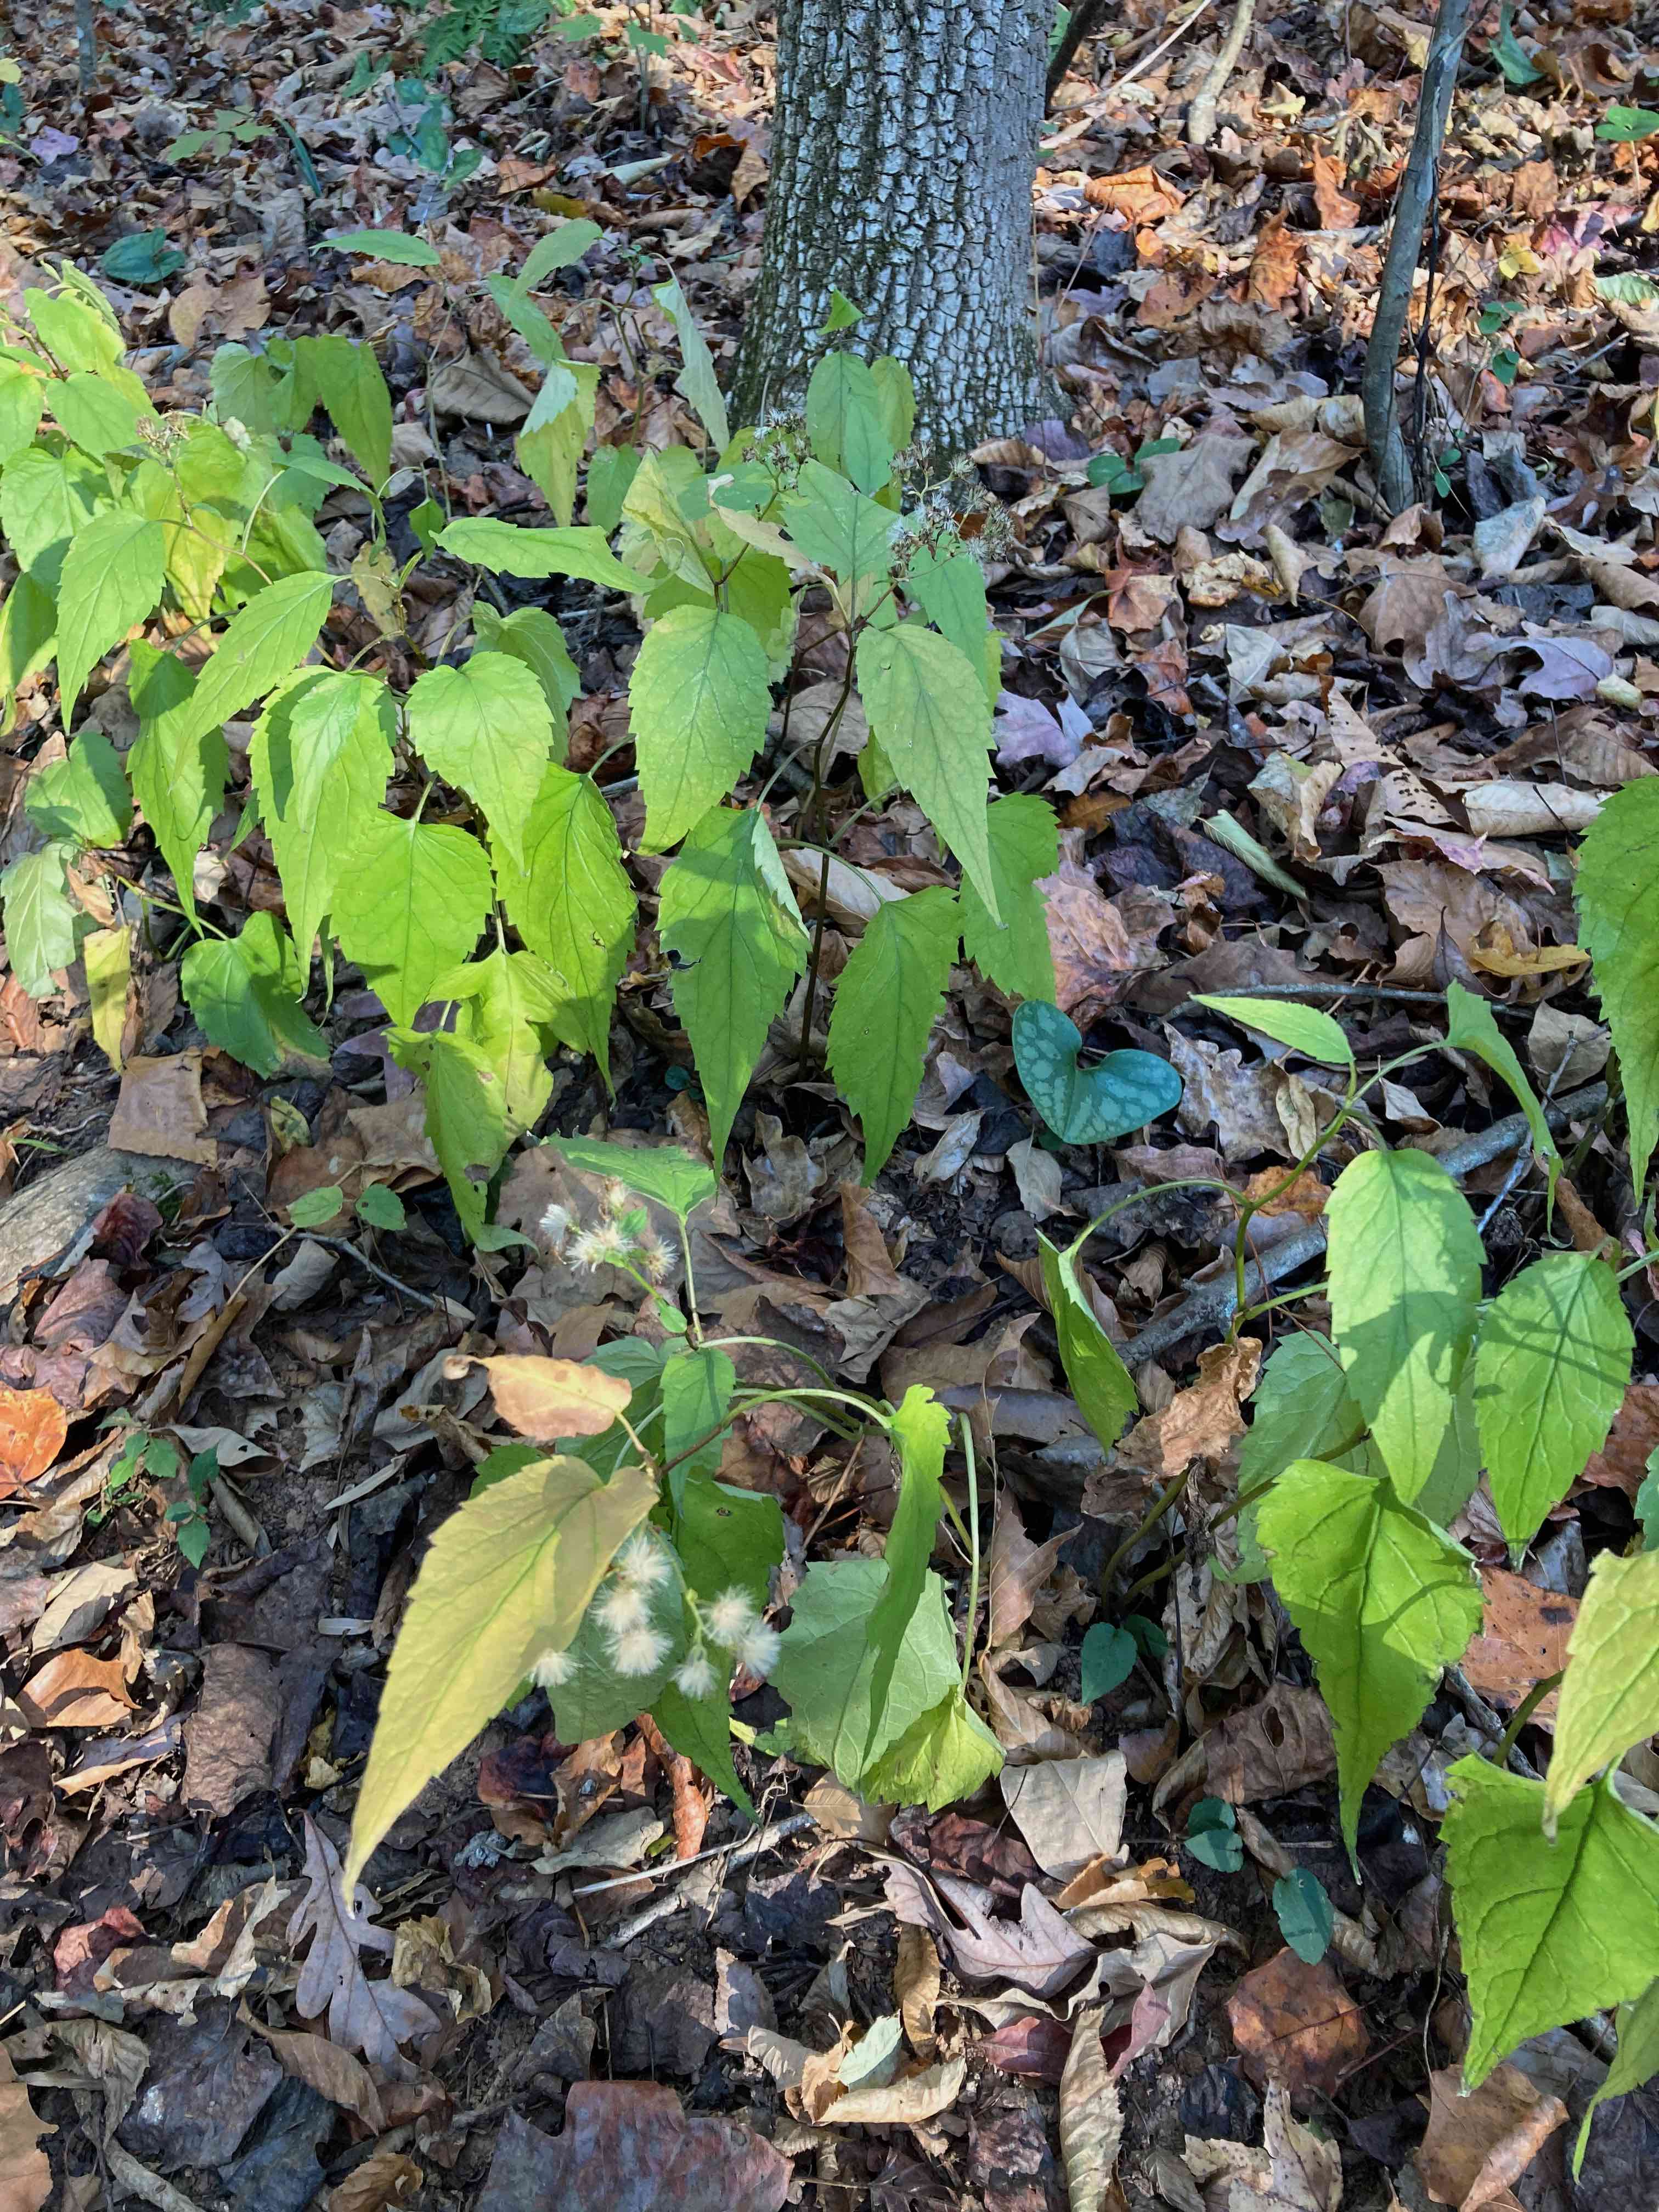 The Scientific Name is Eurybia divaricata [= Aster divaricatus]. You will likely hear them called White Wood Aster, Common White Heart-Leaved Aster. This picture shows the Plants at the end of the growing season in early November. of Eurybia divaricata [= Aster divaricatus]